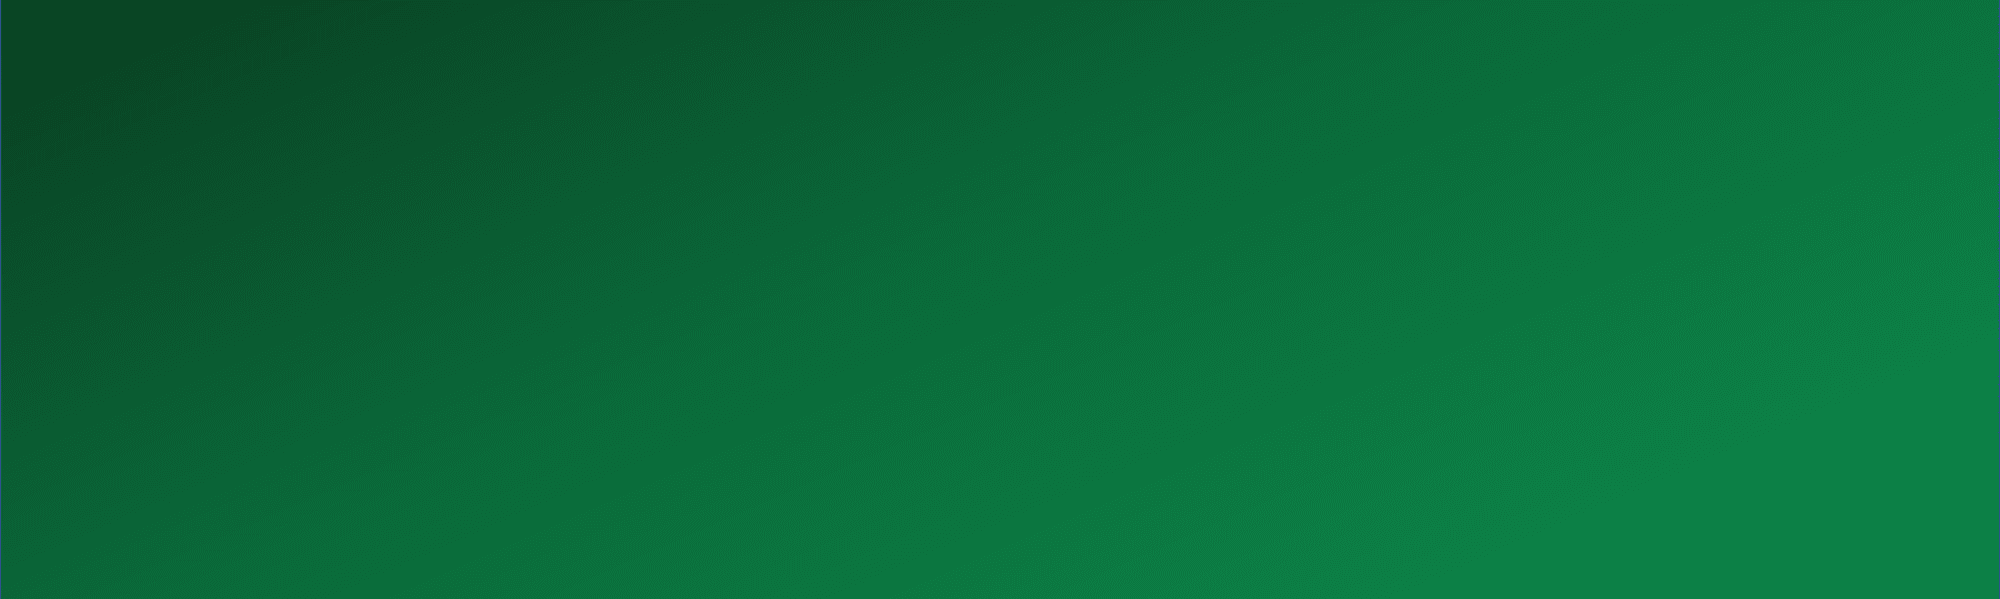 Green background with slight gradient